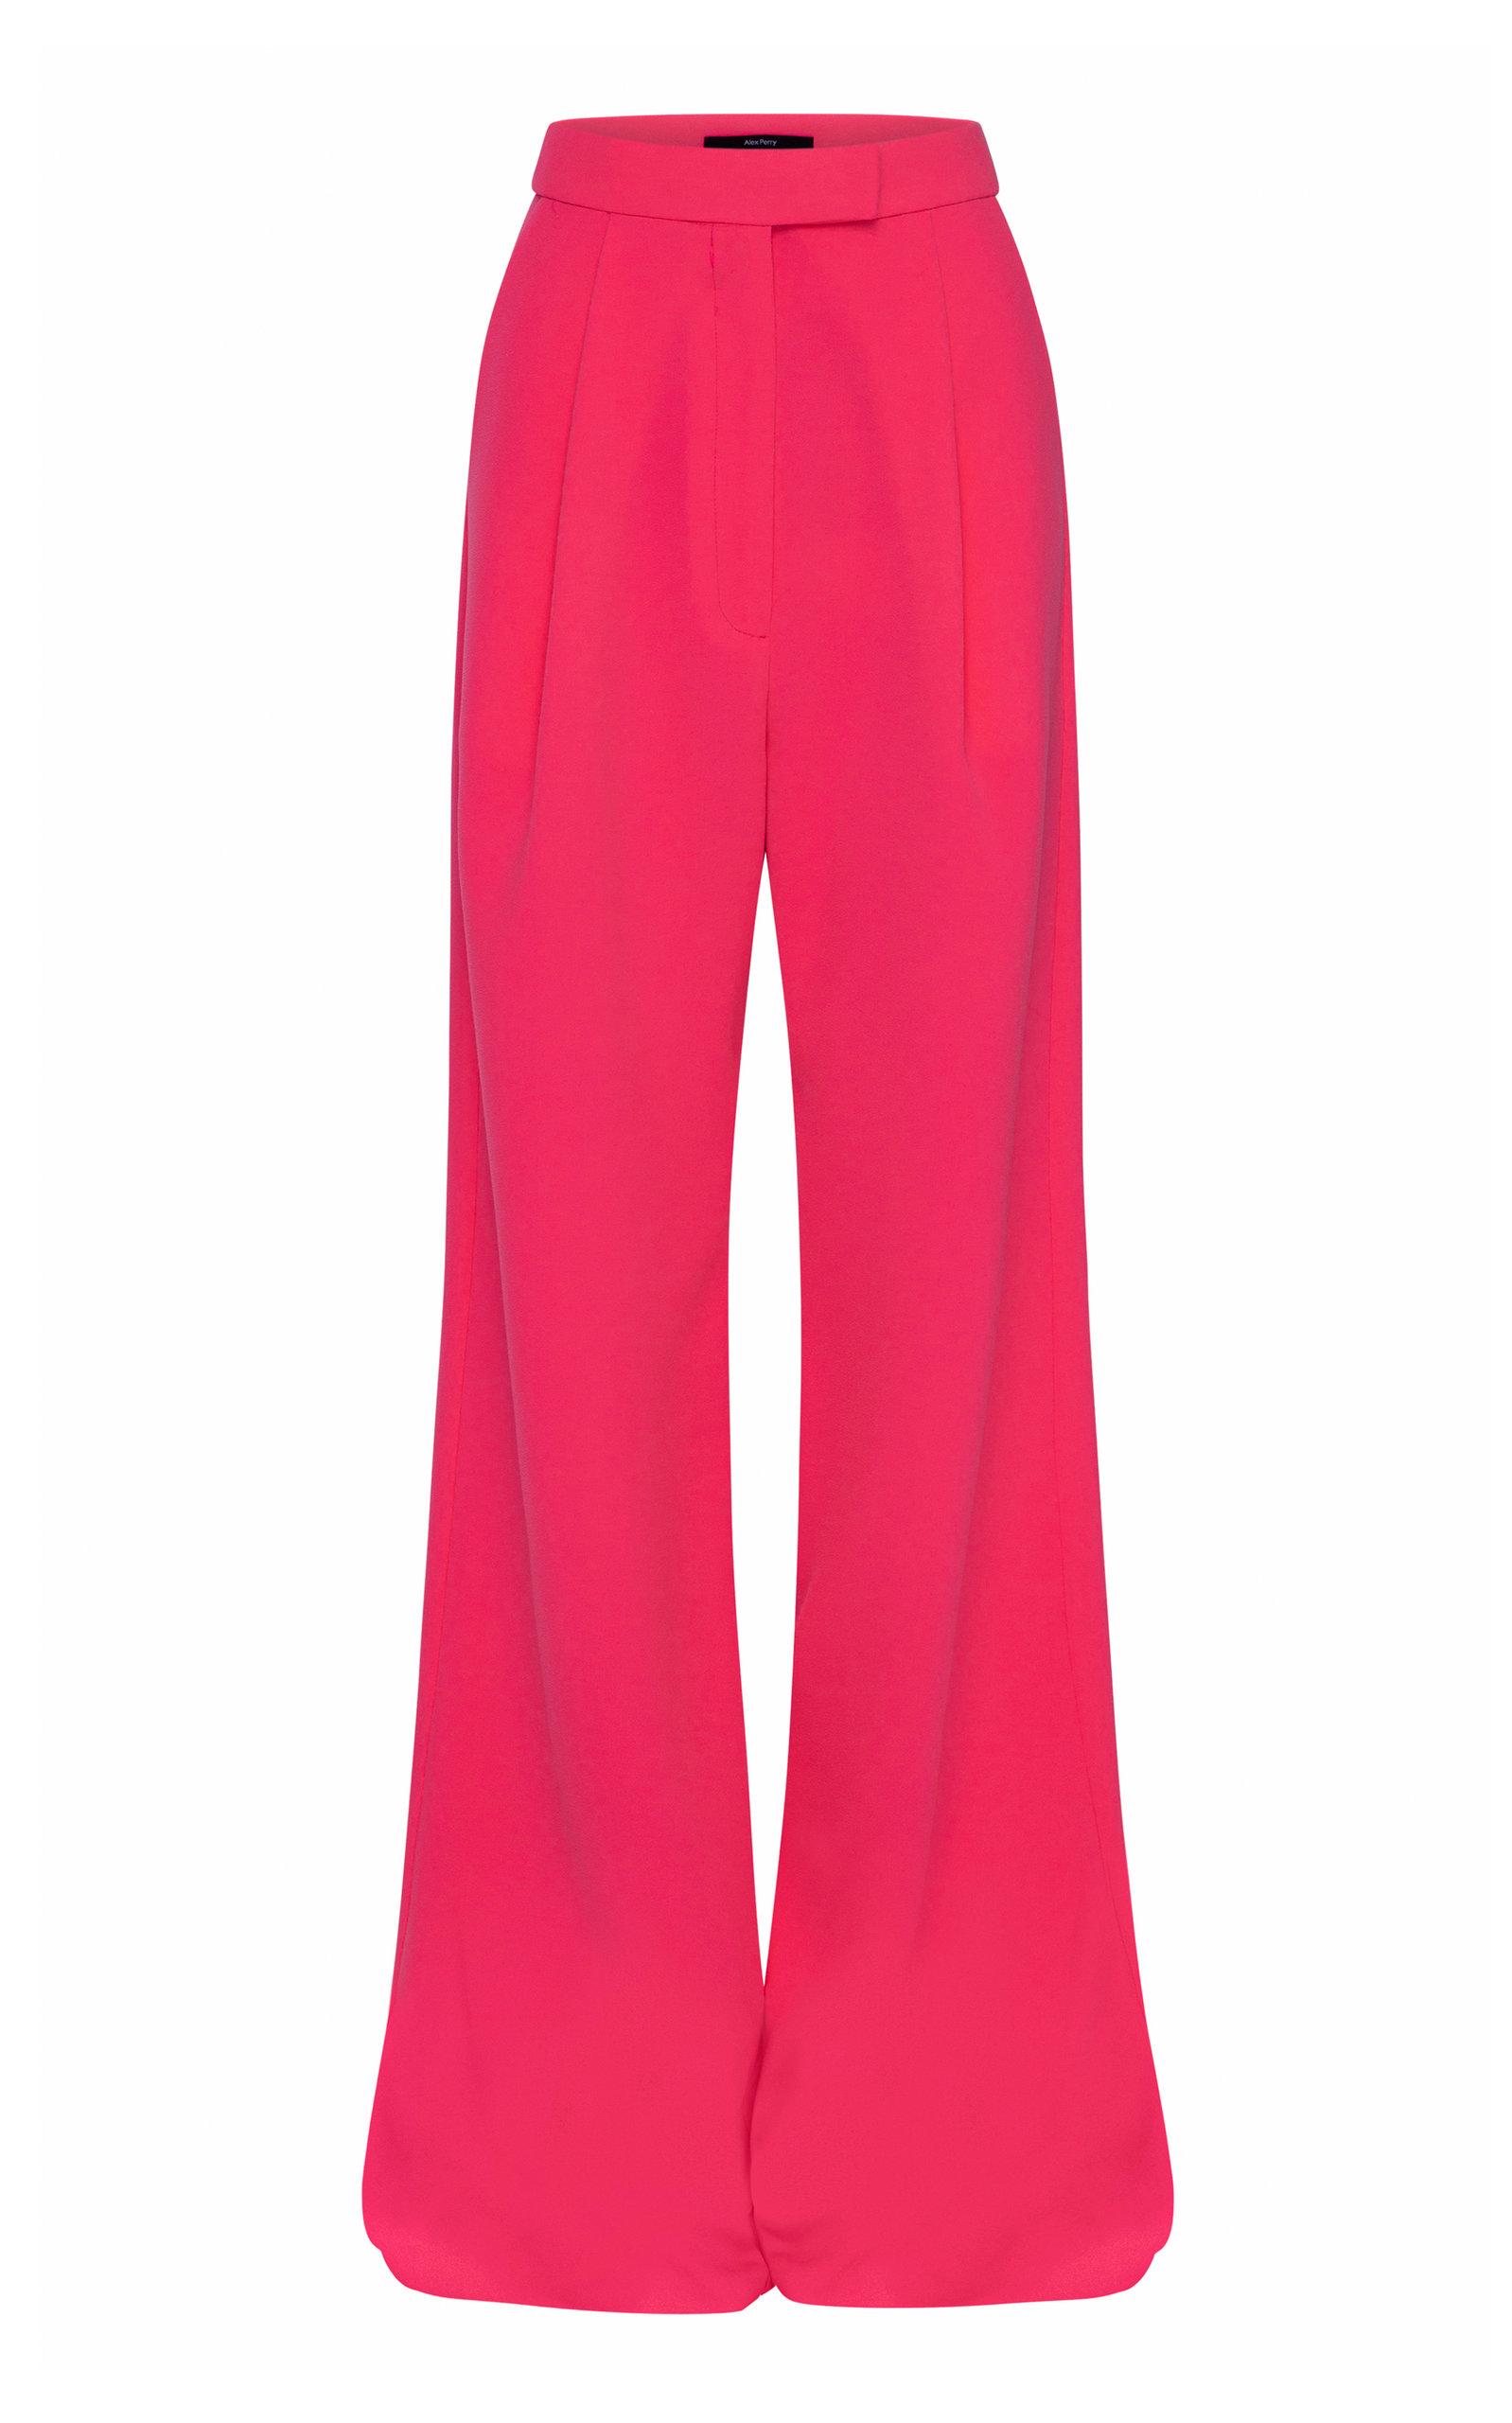 Alex Perry Hale Stretch Crepe Wide-leg Pants in Pink | Lyst